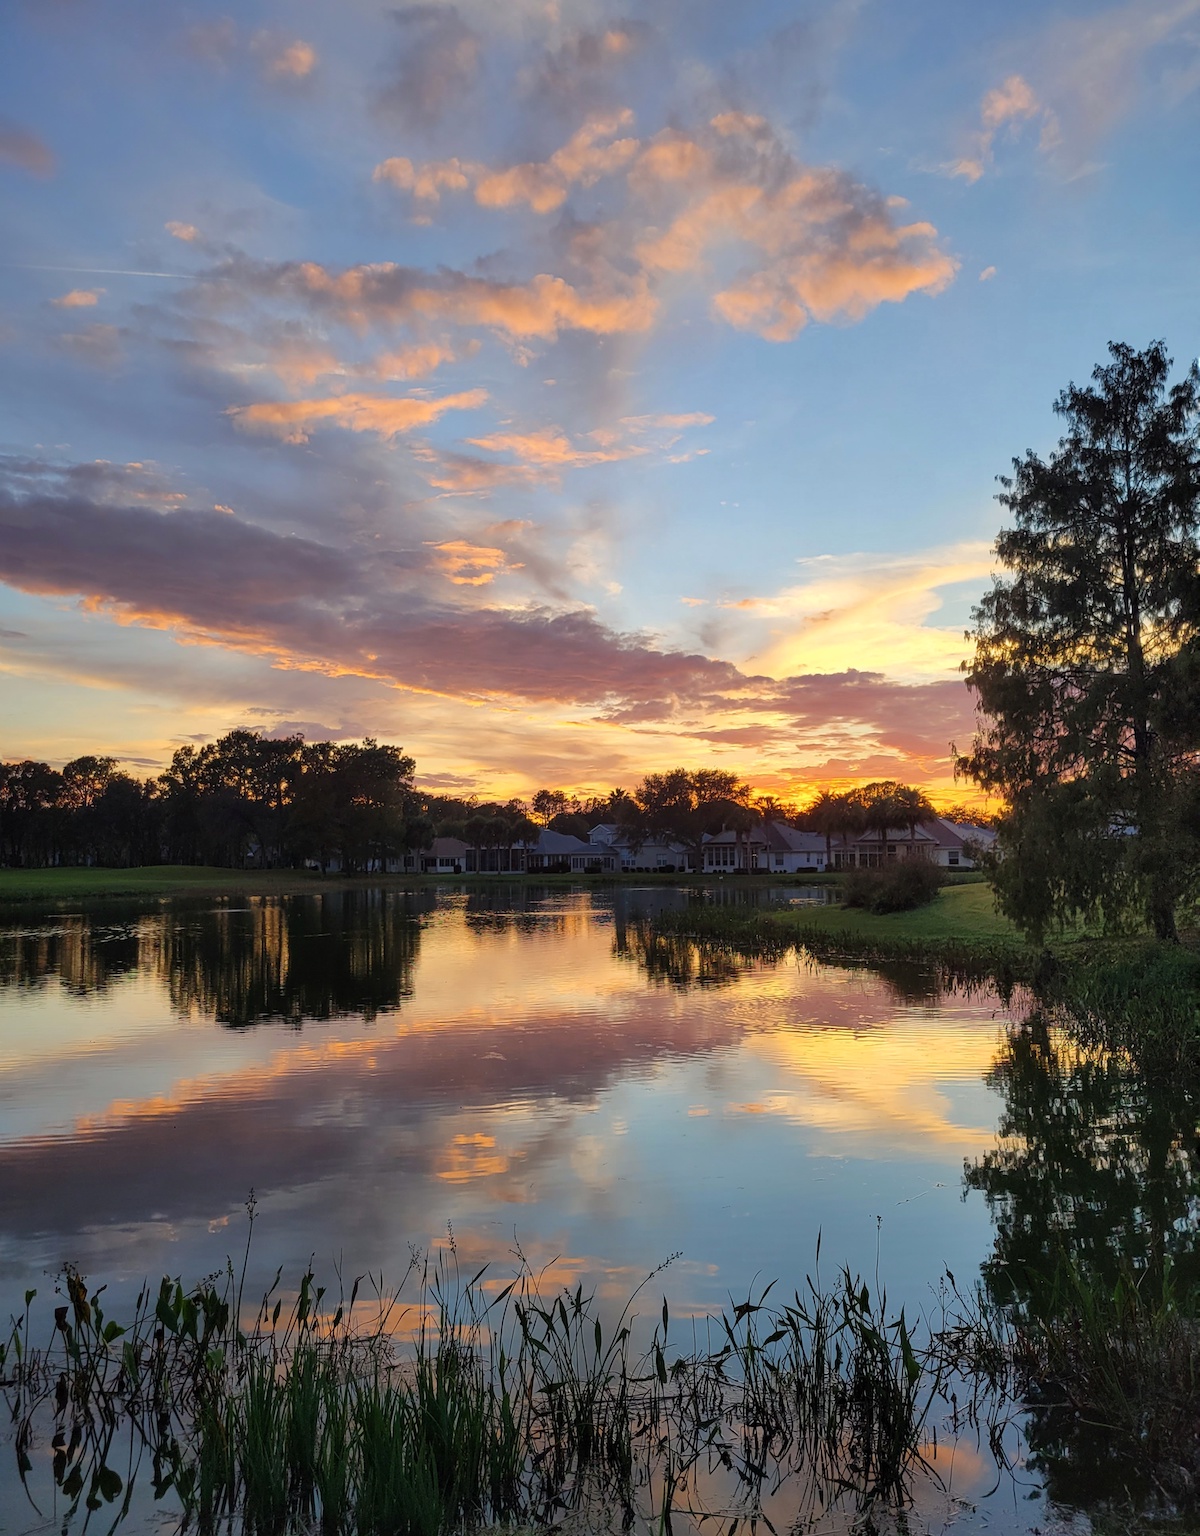 Colorful Reflections At The Royal Oaks Golf Gourse At Oak Run Country Club In Ocala